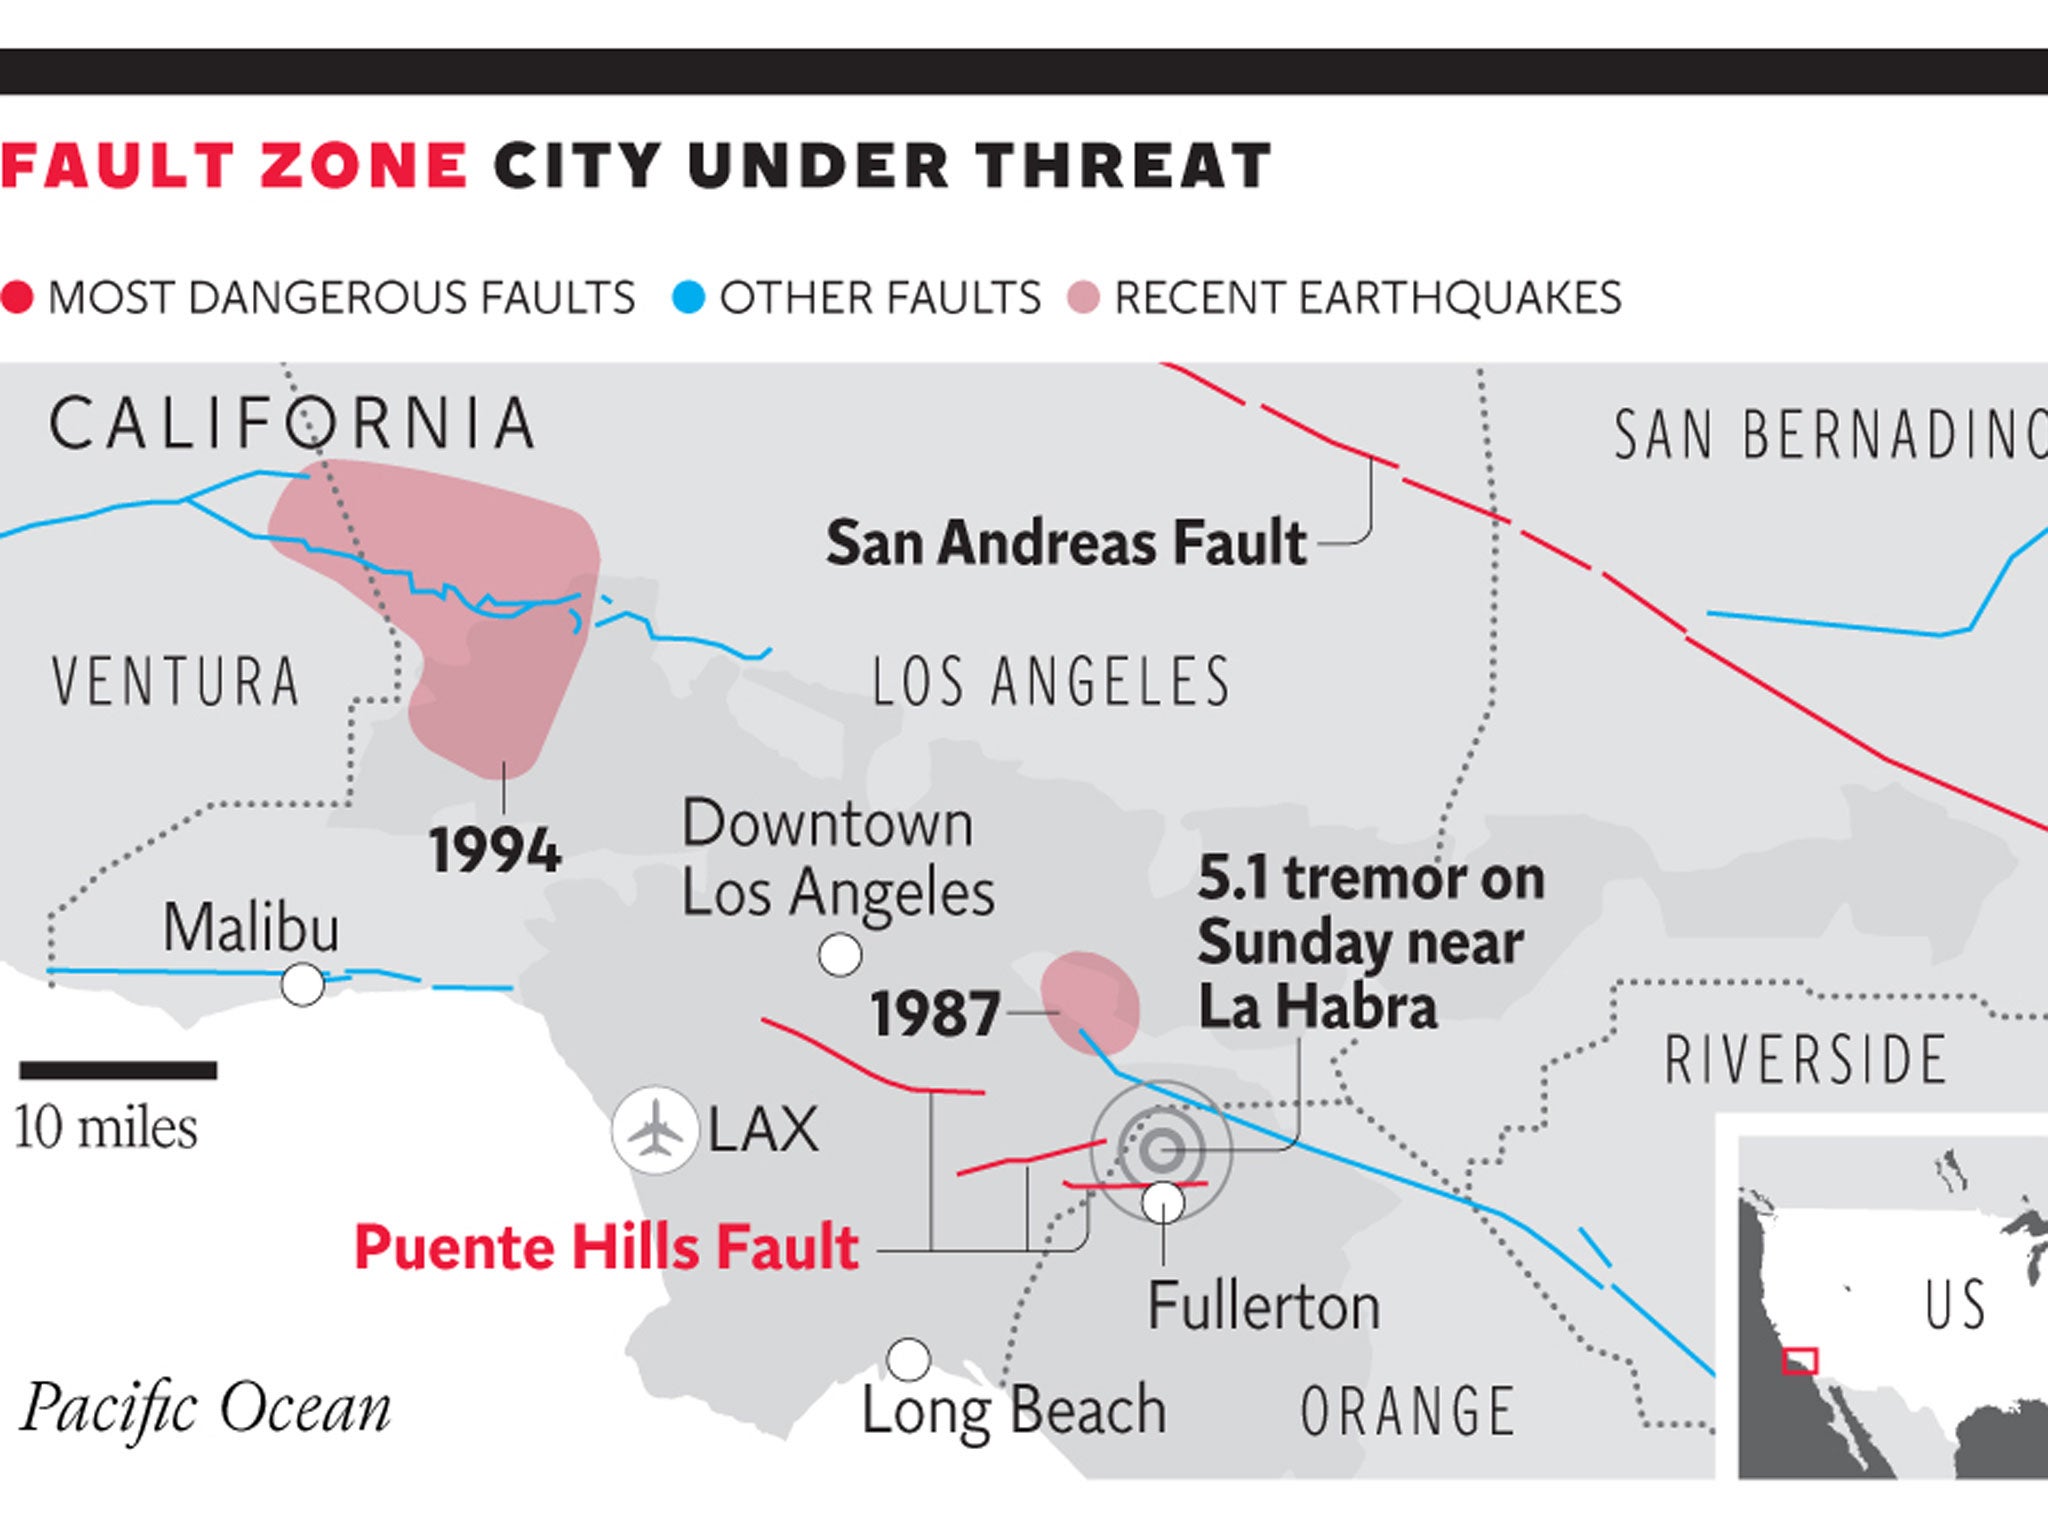 Scientists say the Puente Hills fault suffers a massive quake approximately once every 2,500 years